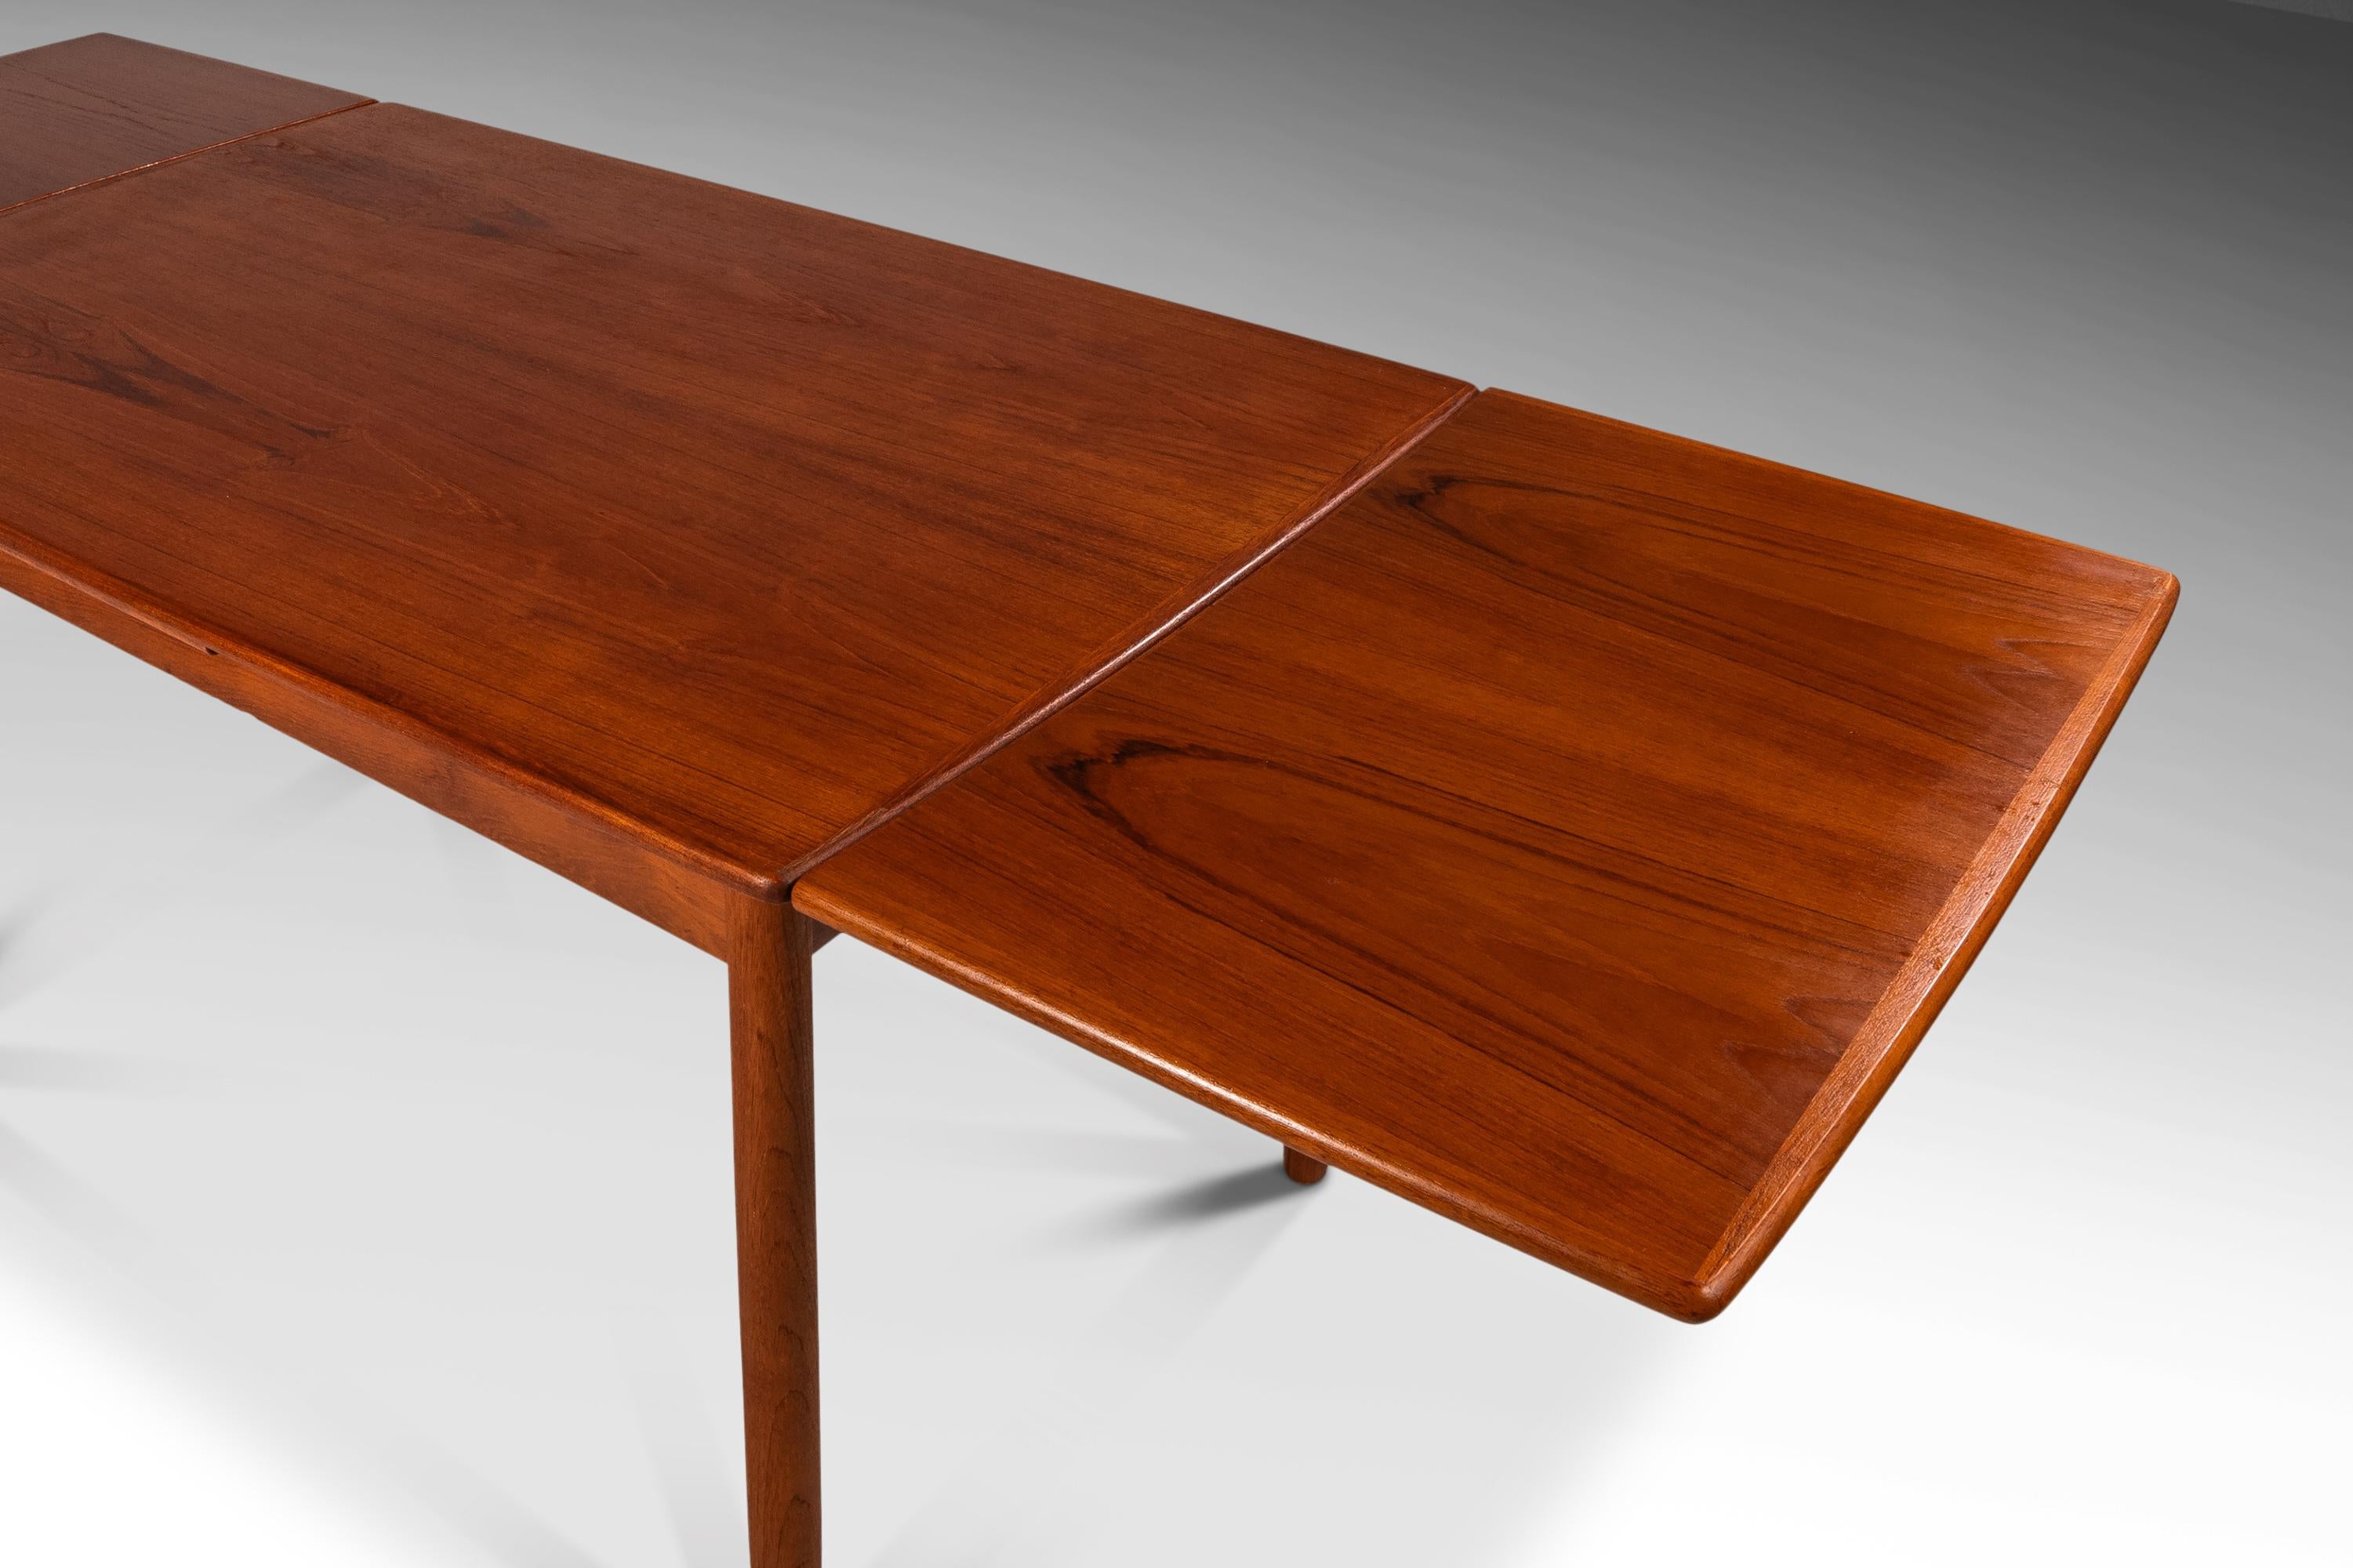 Danish Modern Expansion Dining Table in Teak w/ Stow-In-Table Leaves, c. 1960s For Sale 5